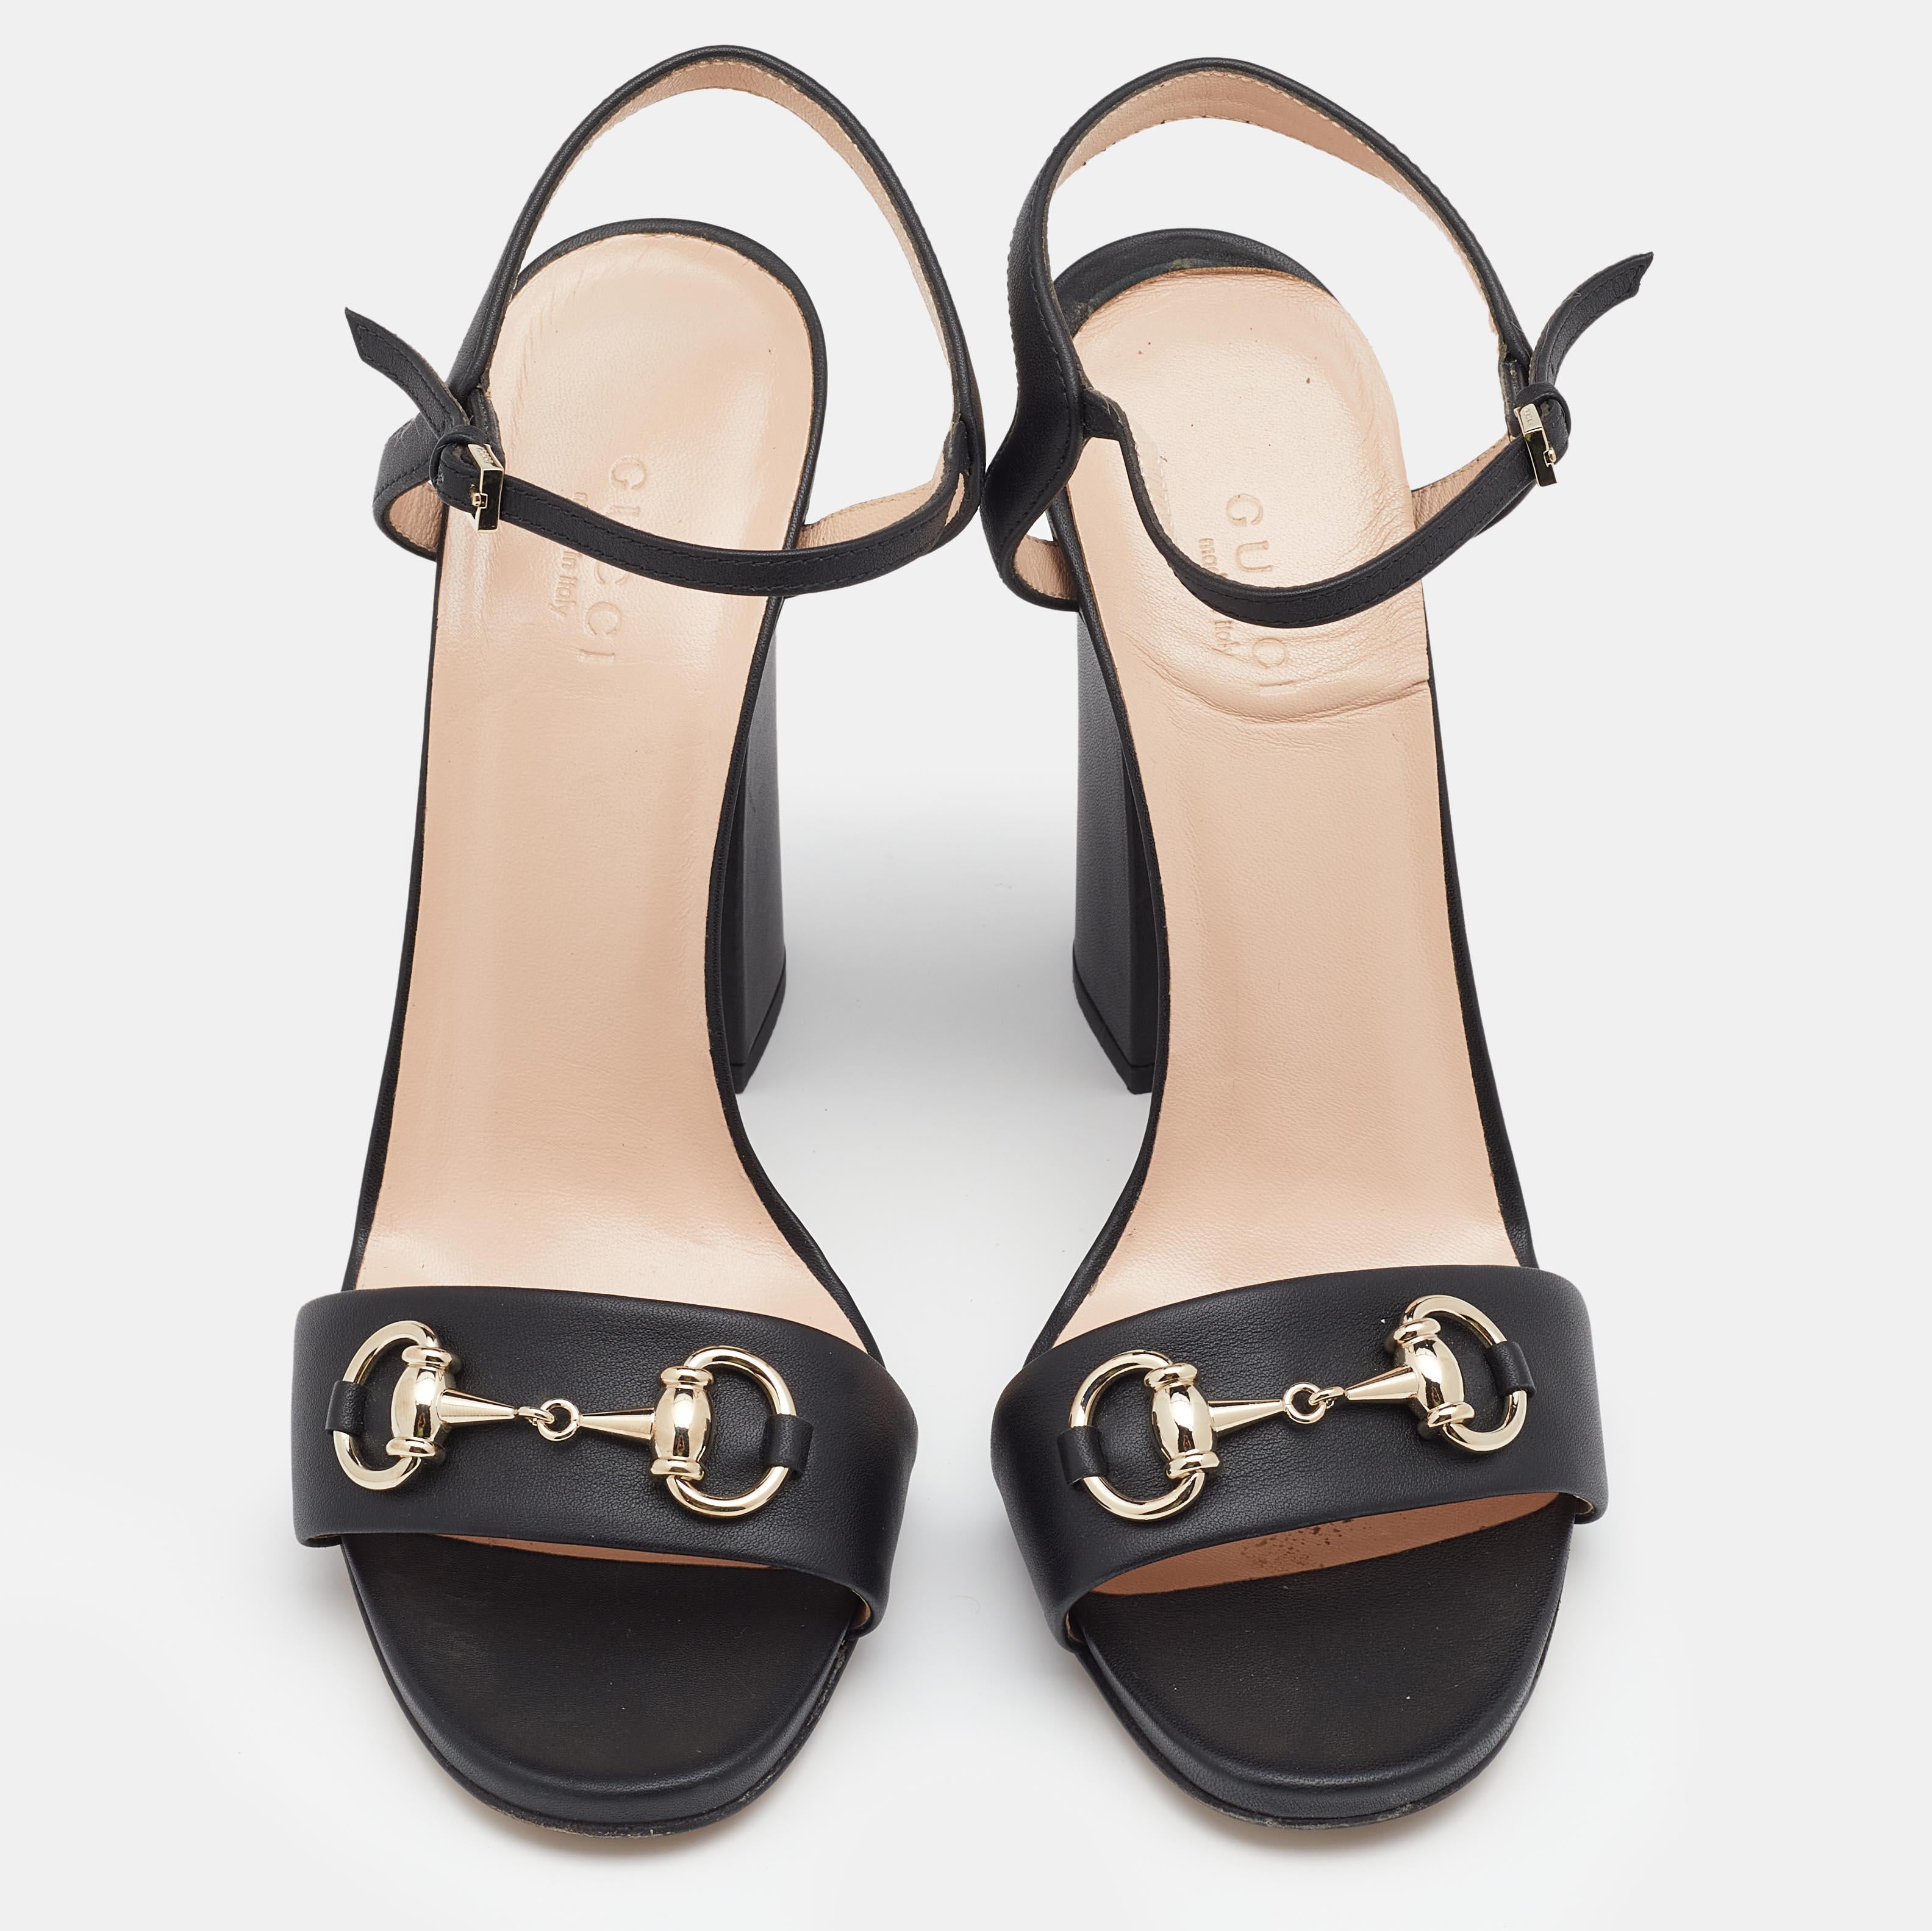 Look glamorous no matter what you wear, with these beautiful leather sandals. These sandals are lined with the finest quality leather and are very durable. These fashionable sandals from Gucci feature the Horsebit motifs on the uppers, ankle straps,